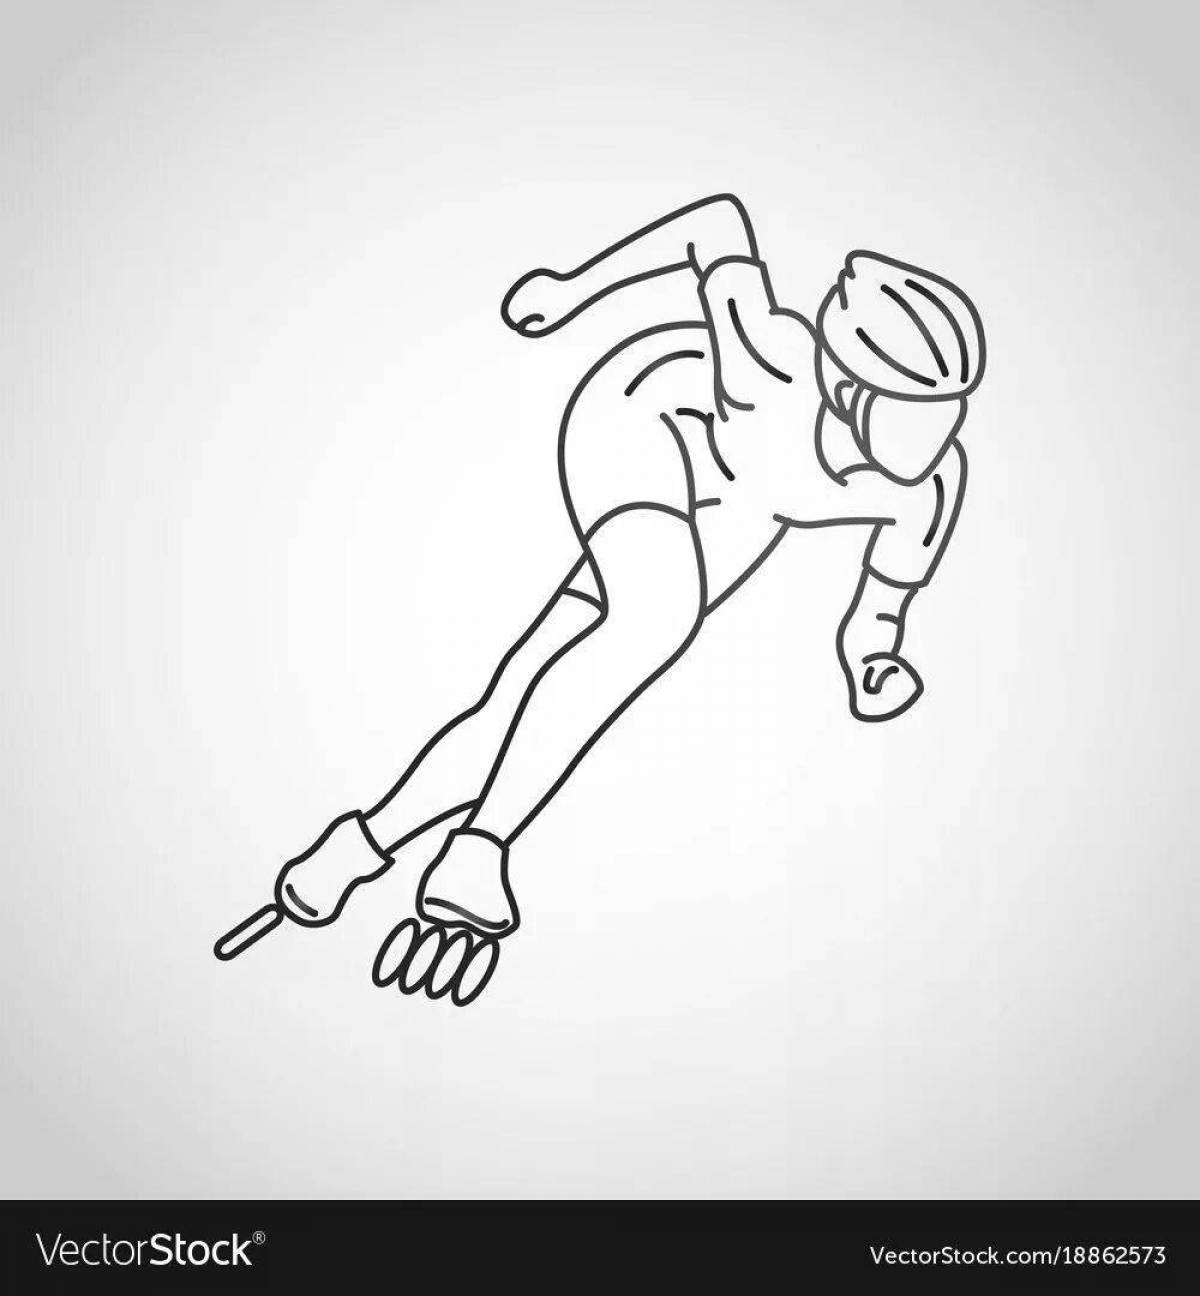 Skater coloring page for kids